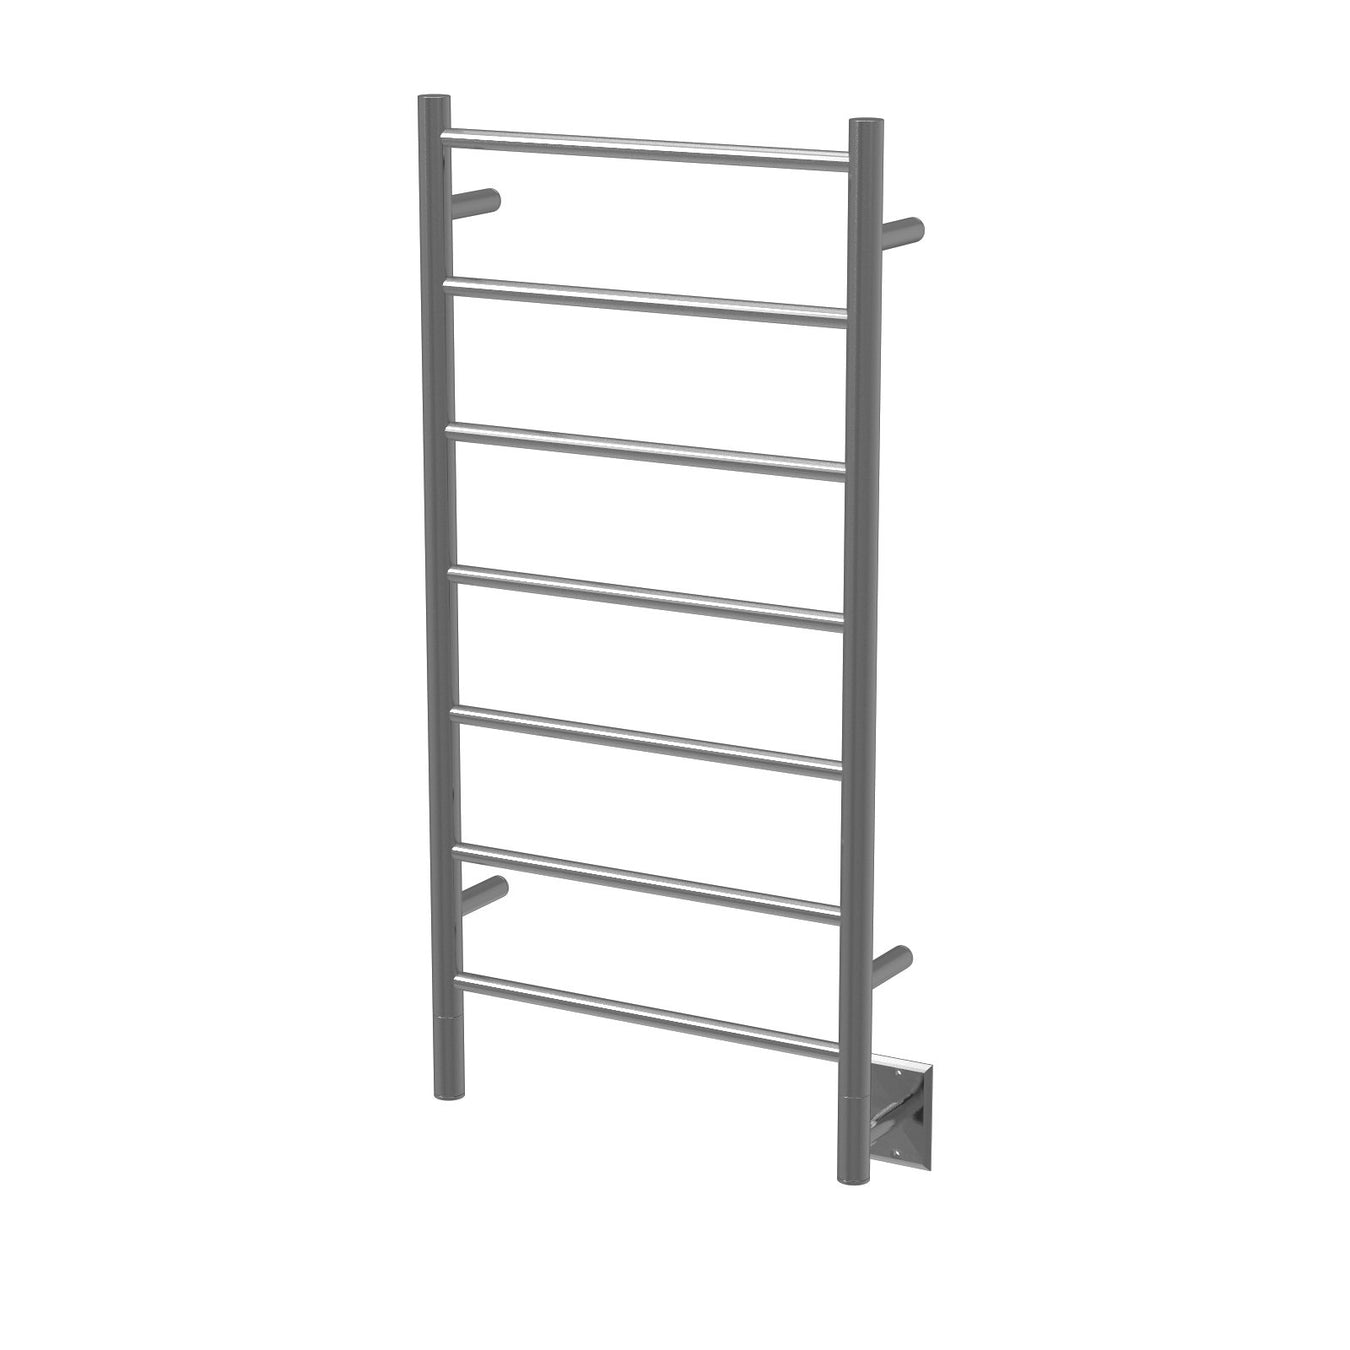 Amba Products Jeeves Collection Model F Straight Towel Warmers